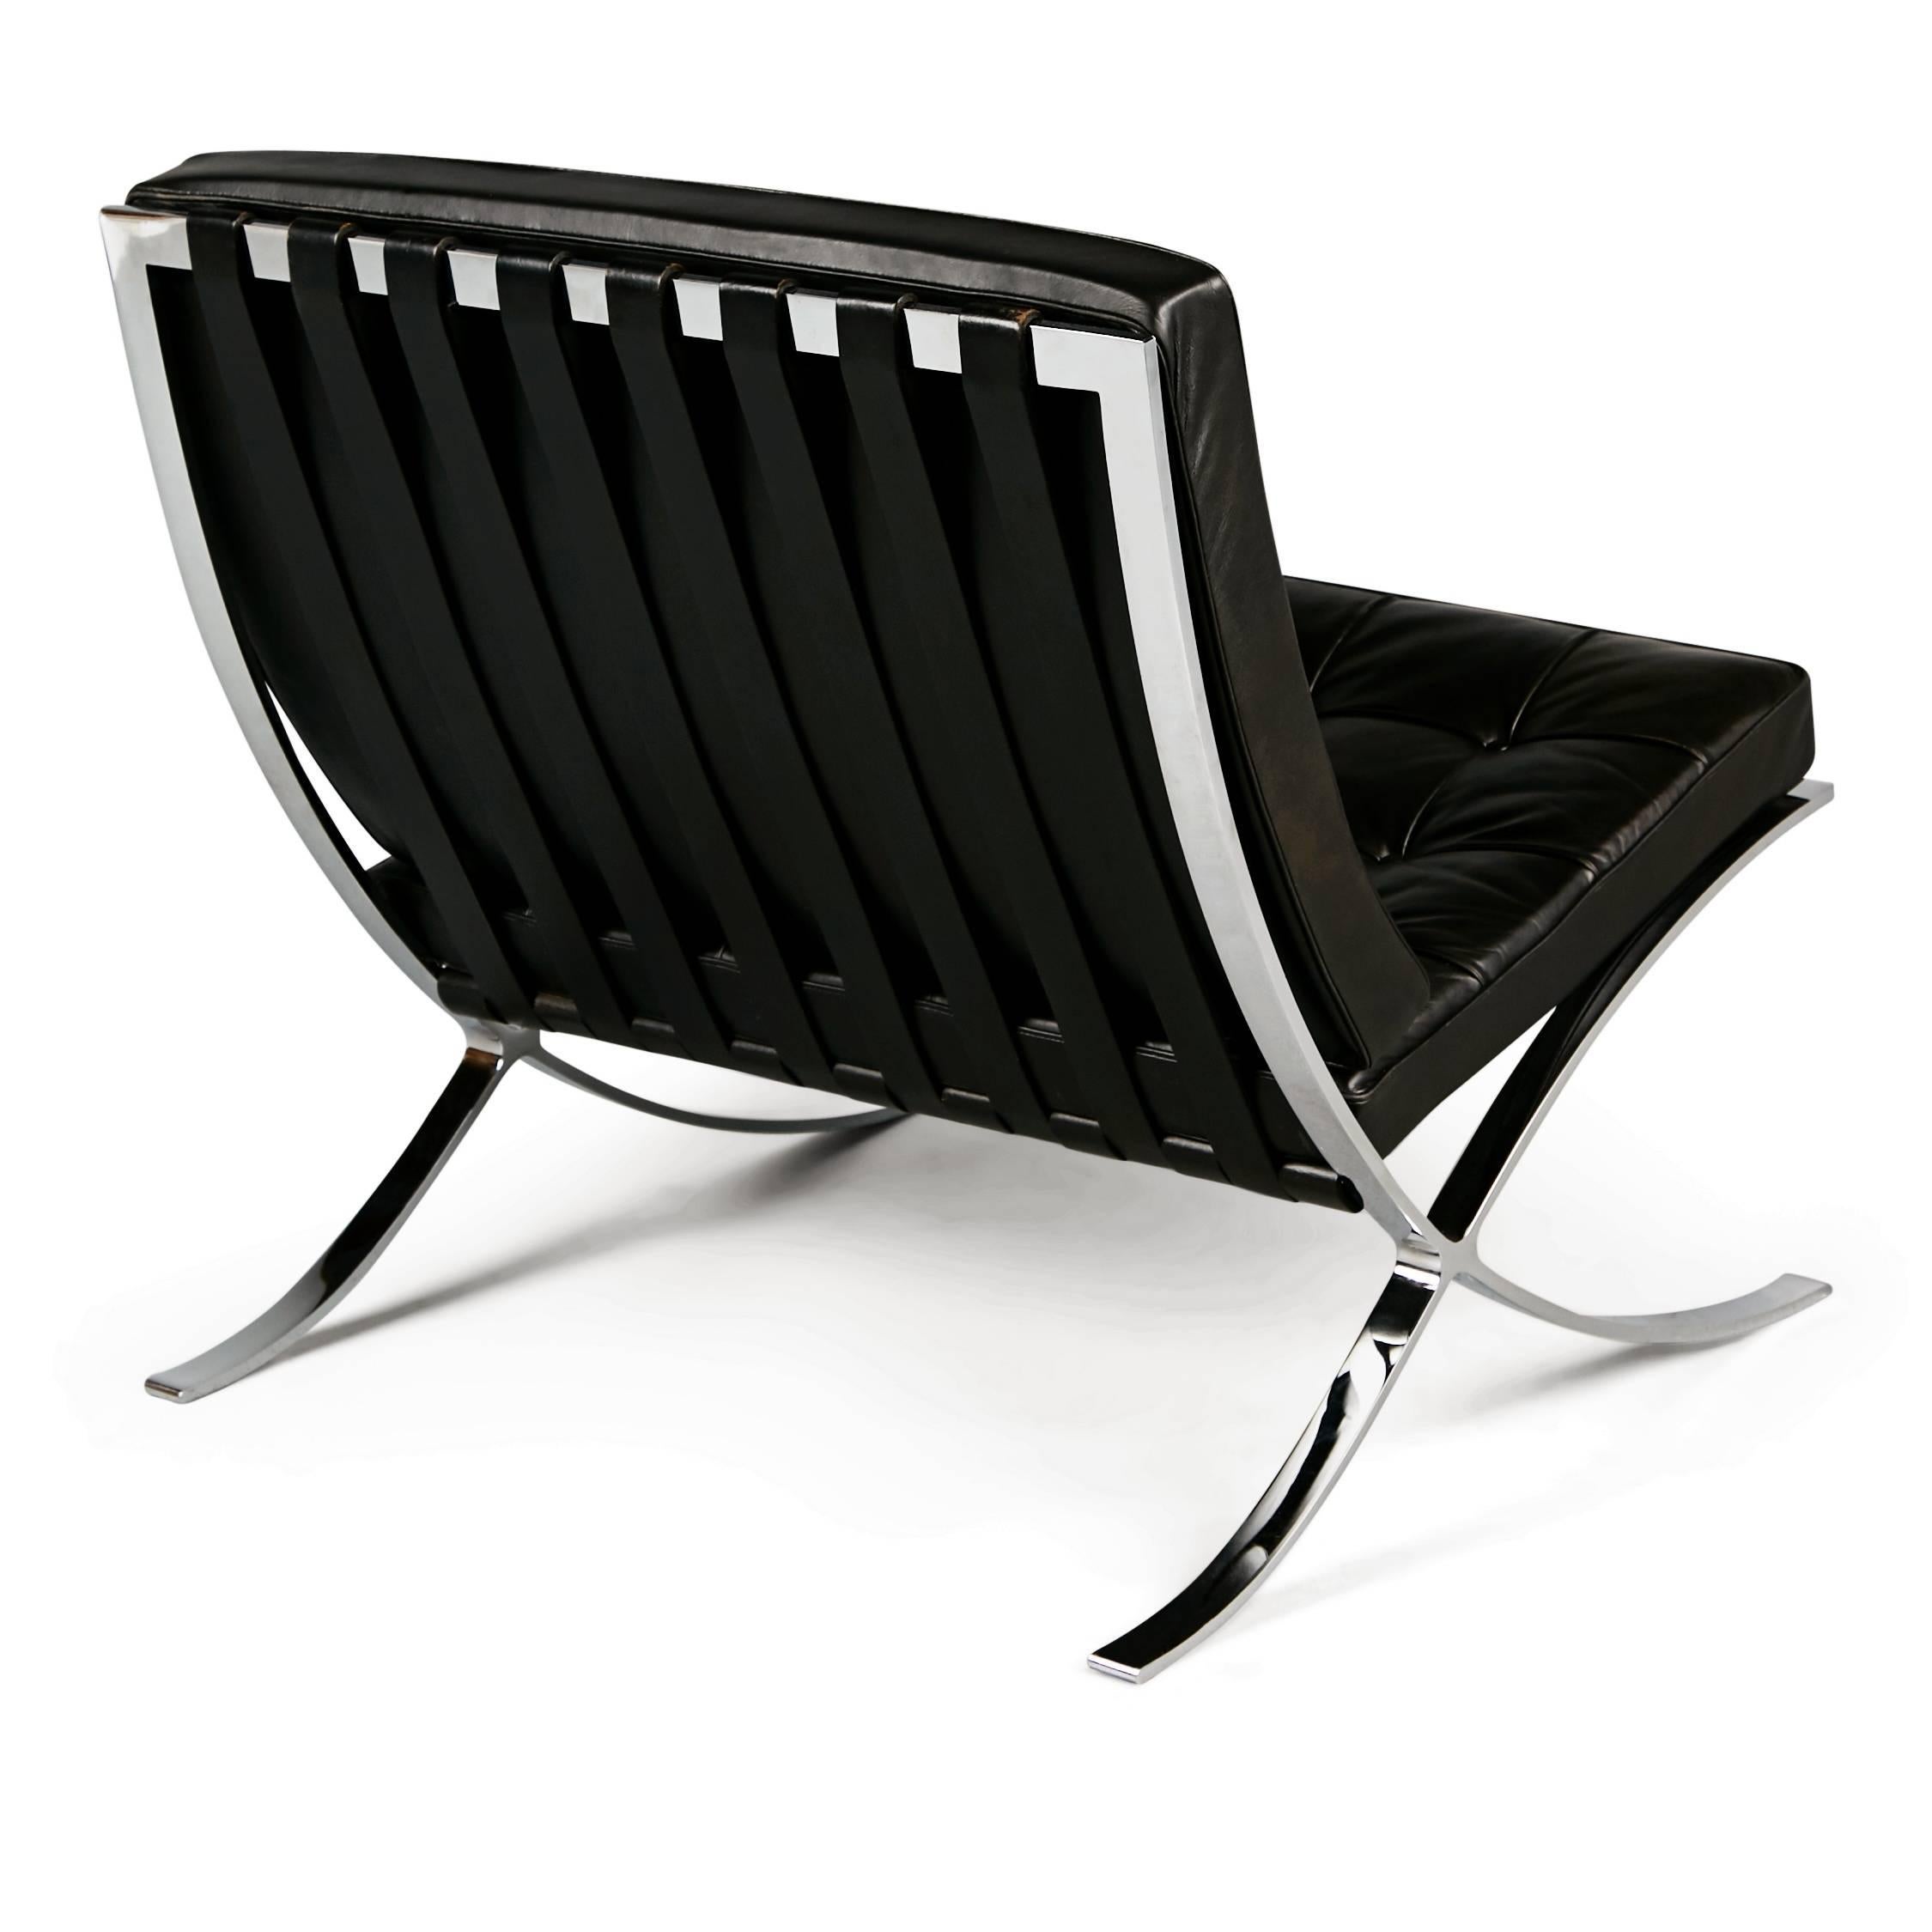 Mid-Century Modern Signed Knoll Black Leather Barcelona Lounge Chair by Ludwig Mies van der Rohe